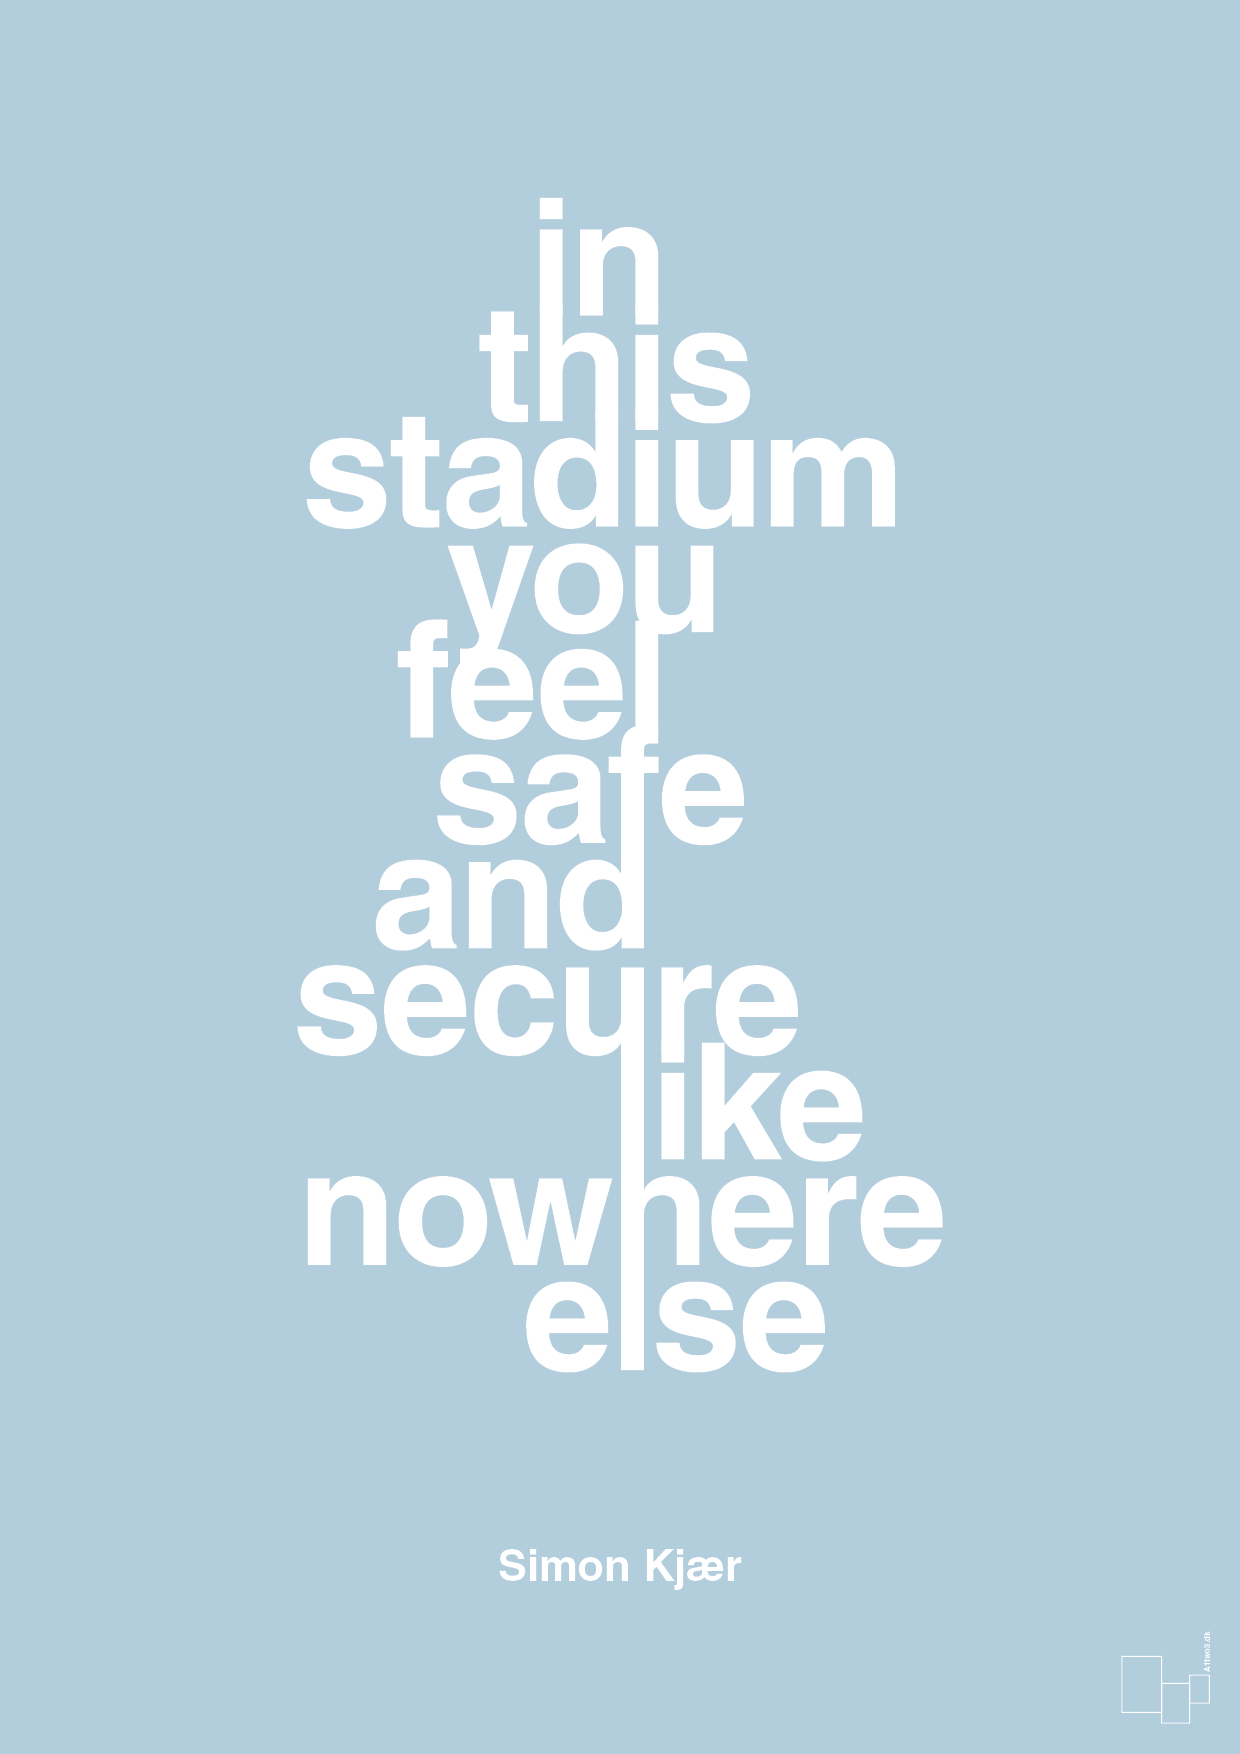 in this stadium you feel safe and secure like nowhere else - Plakat med Citater i Heavenly Blue